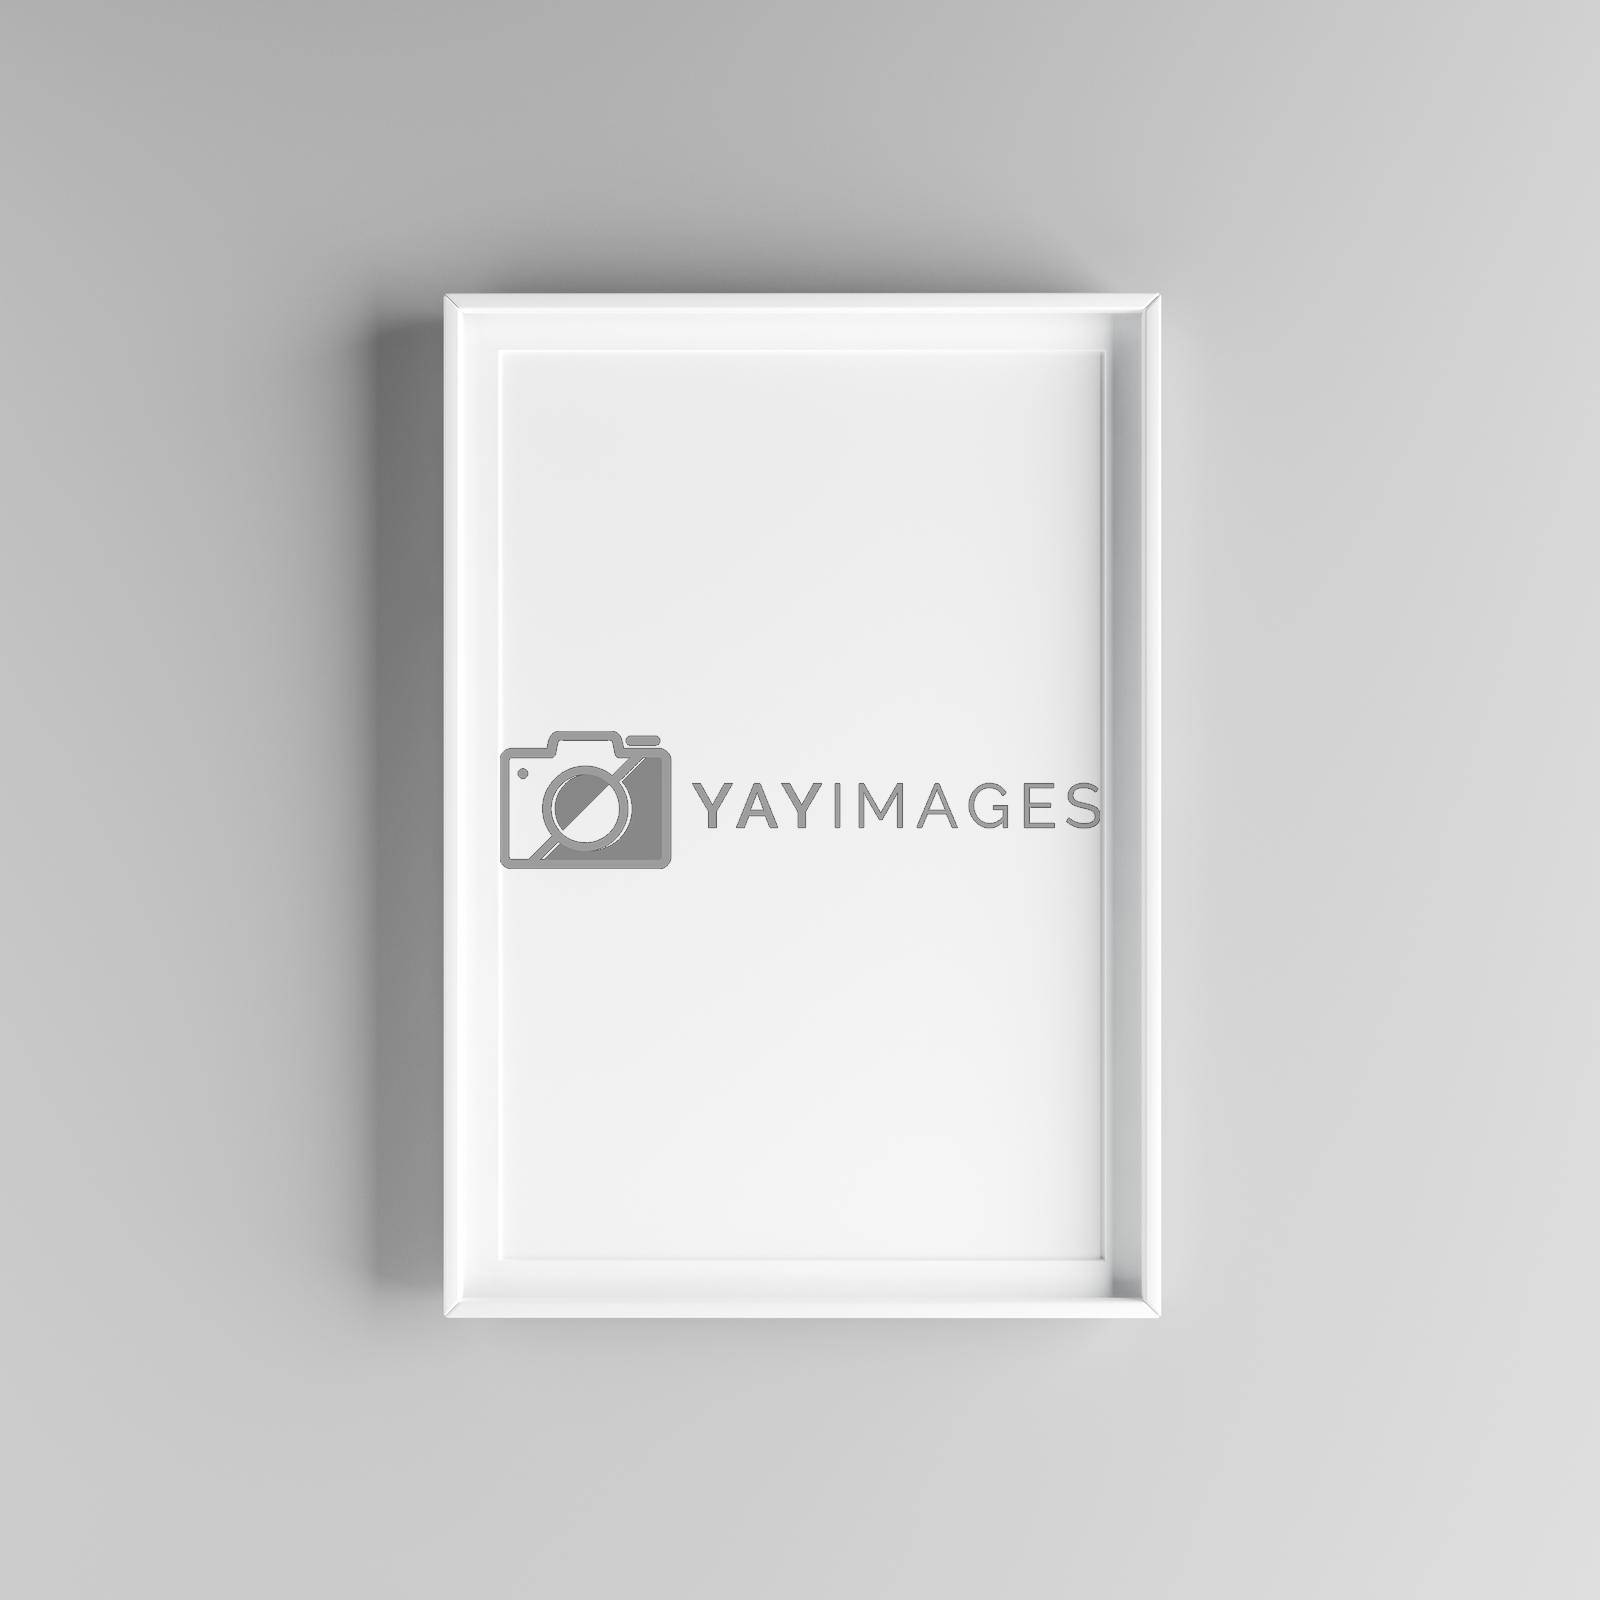 Royalty free image of Elegant and minimalistic picture frame standing on gray wall by adamr